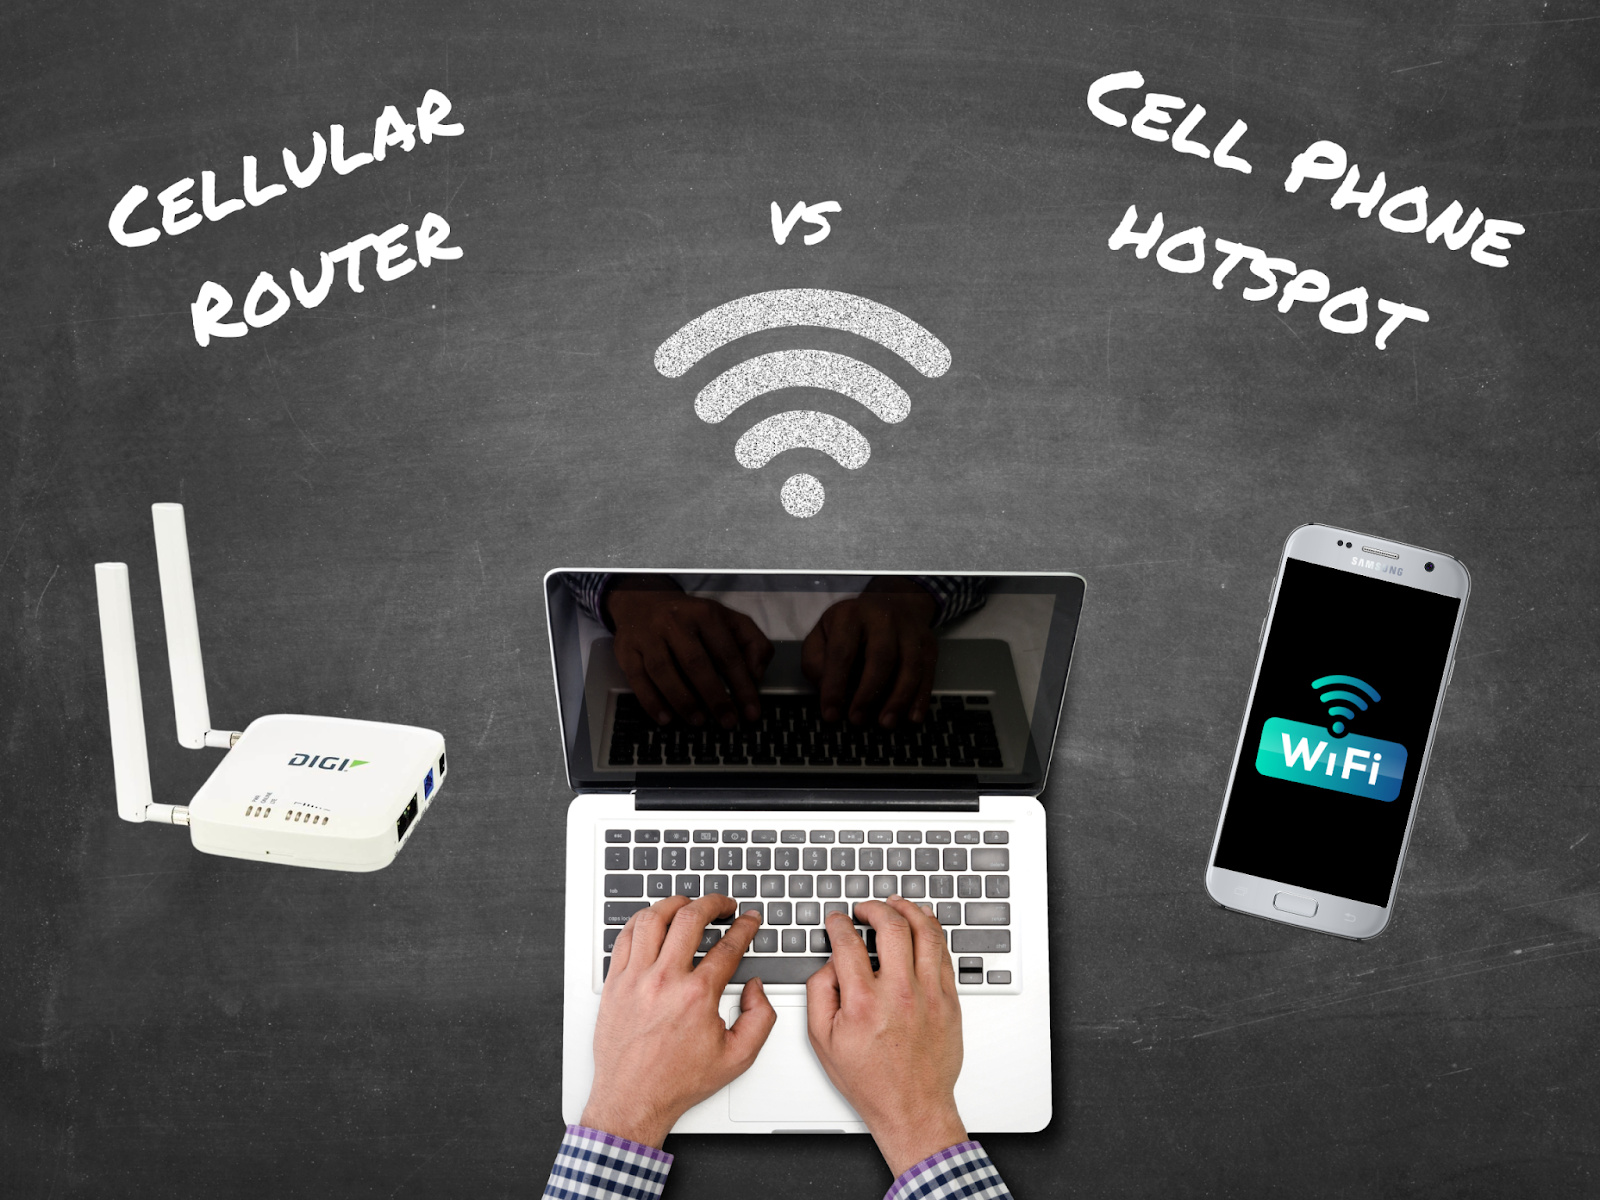 Duplikere Let at forstå håndvask Cellular Routers vs Cell Phone Hotspots: What to Use for Business Failover  - Welcome To The 5Gstore Blog Welcome To The 5Gstore Blog - Lastest News,  Product Info & More